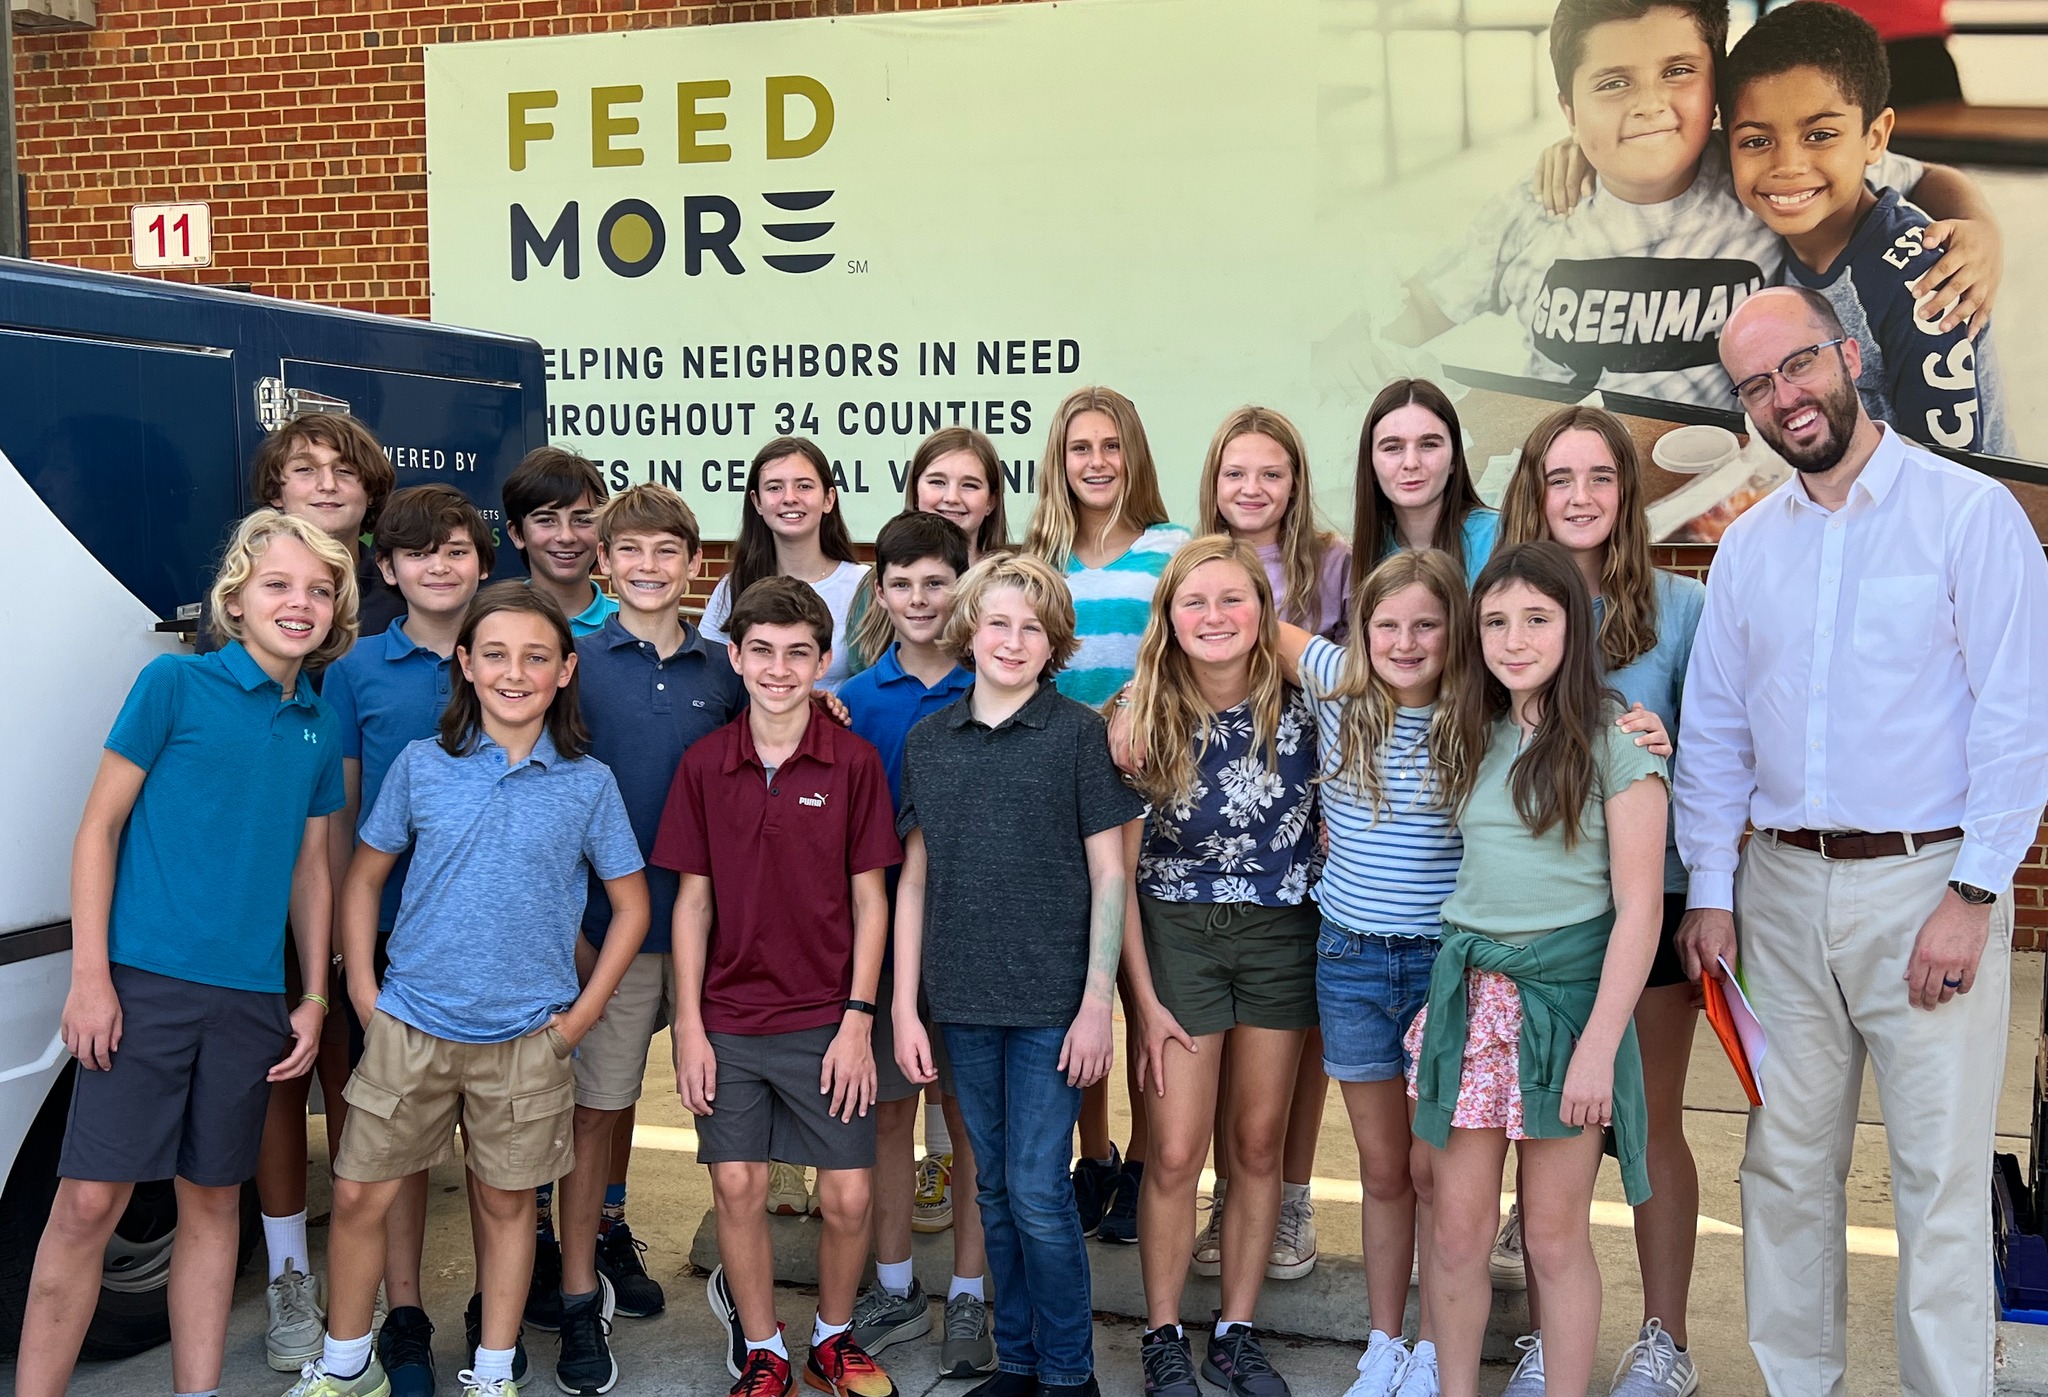 Each semester, our Middle Schoolers volunteer at FeedMore and deliver meals for Meals on Wheels as part of a long partnership between this organization and St. Michael's.